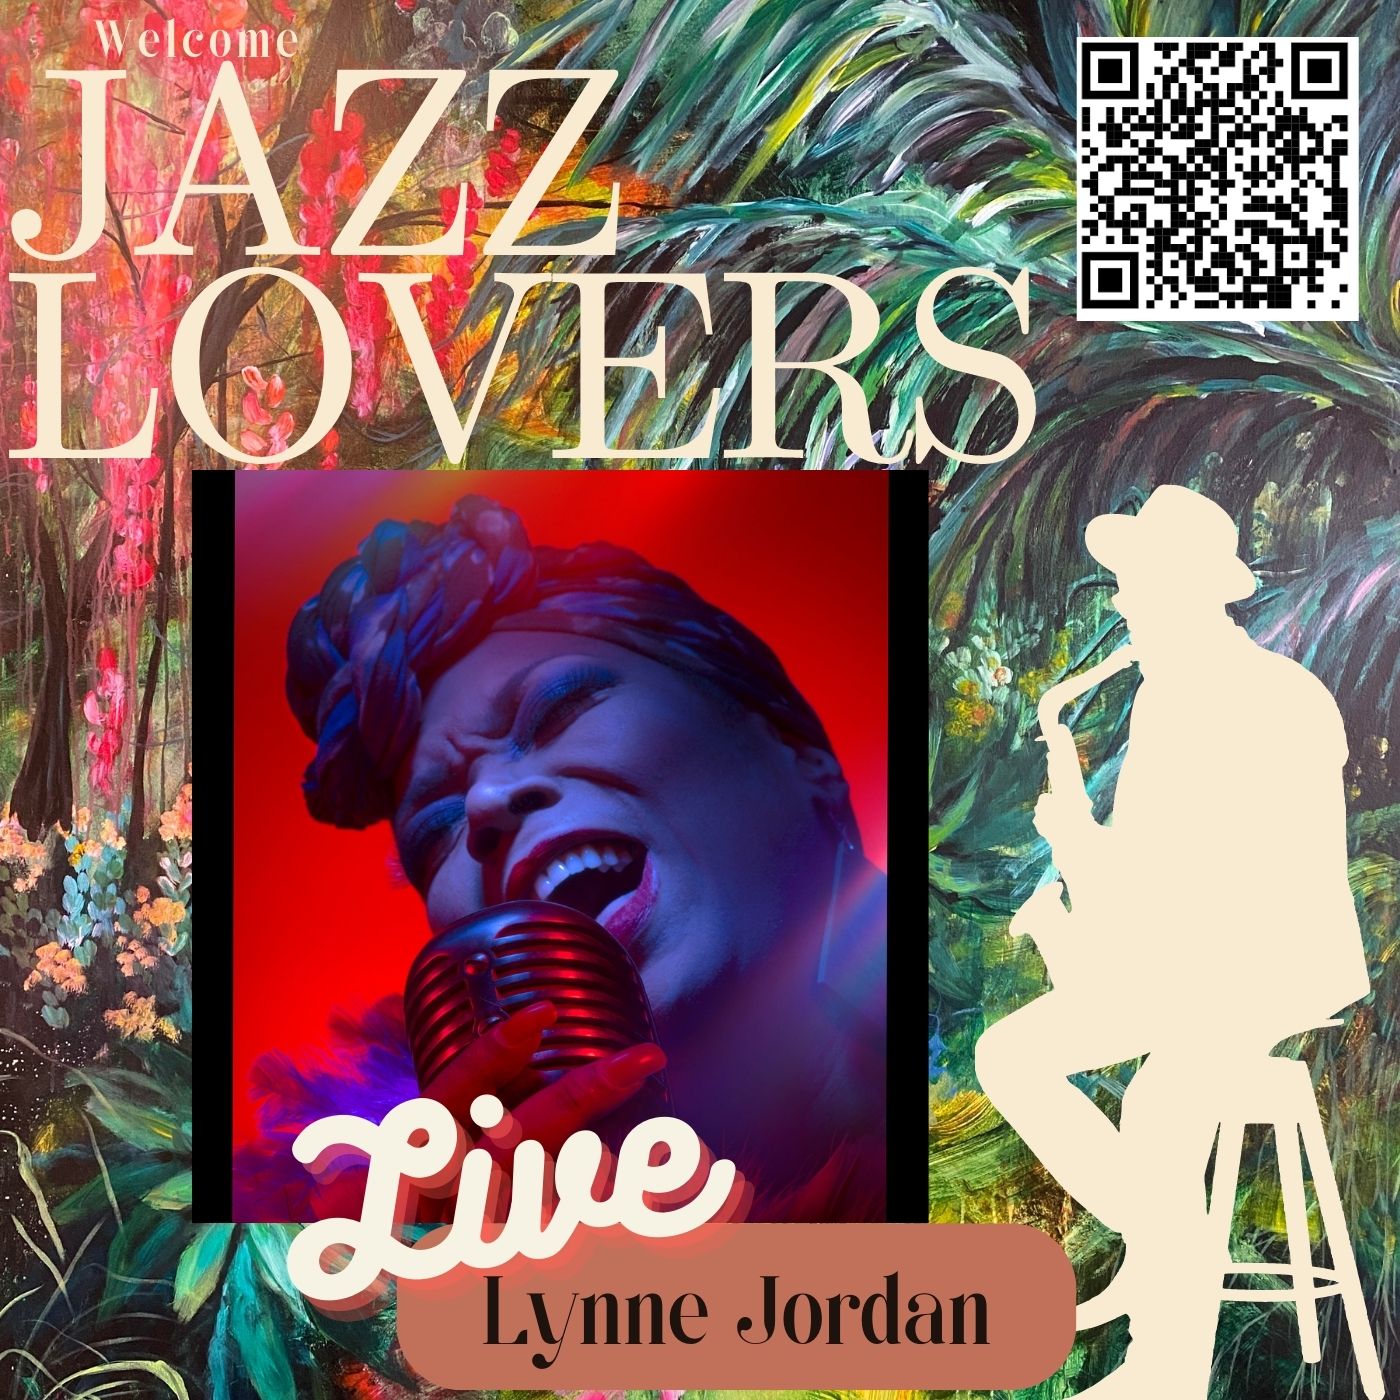 Use Code JAZZLUV and tix are $5 Live JAZZ featuring Lynne Jordan - $10 Advanced -$15 at the door